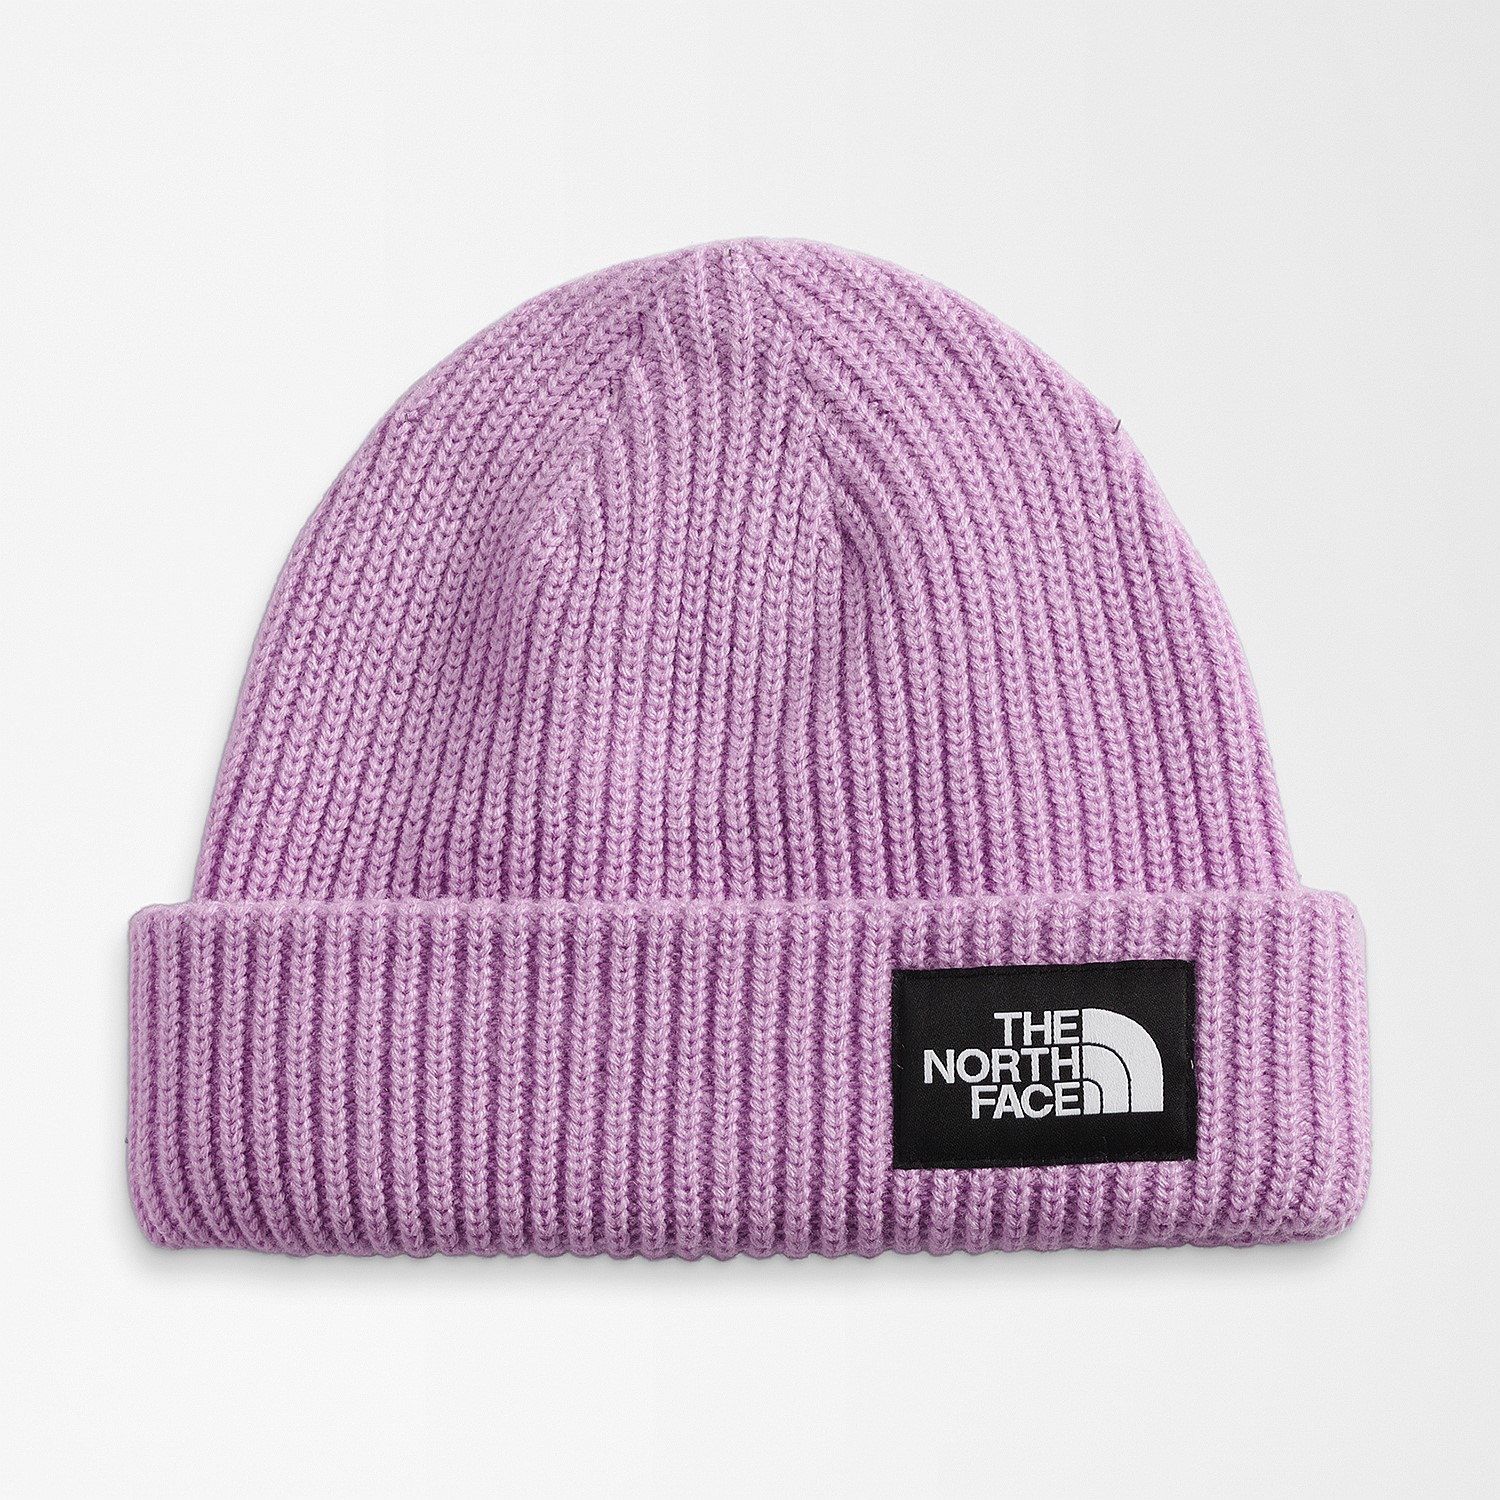 The North Face Salty Dog Beanie | Beanies | Stirling Sports